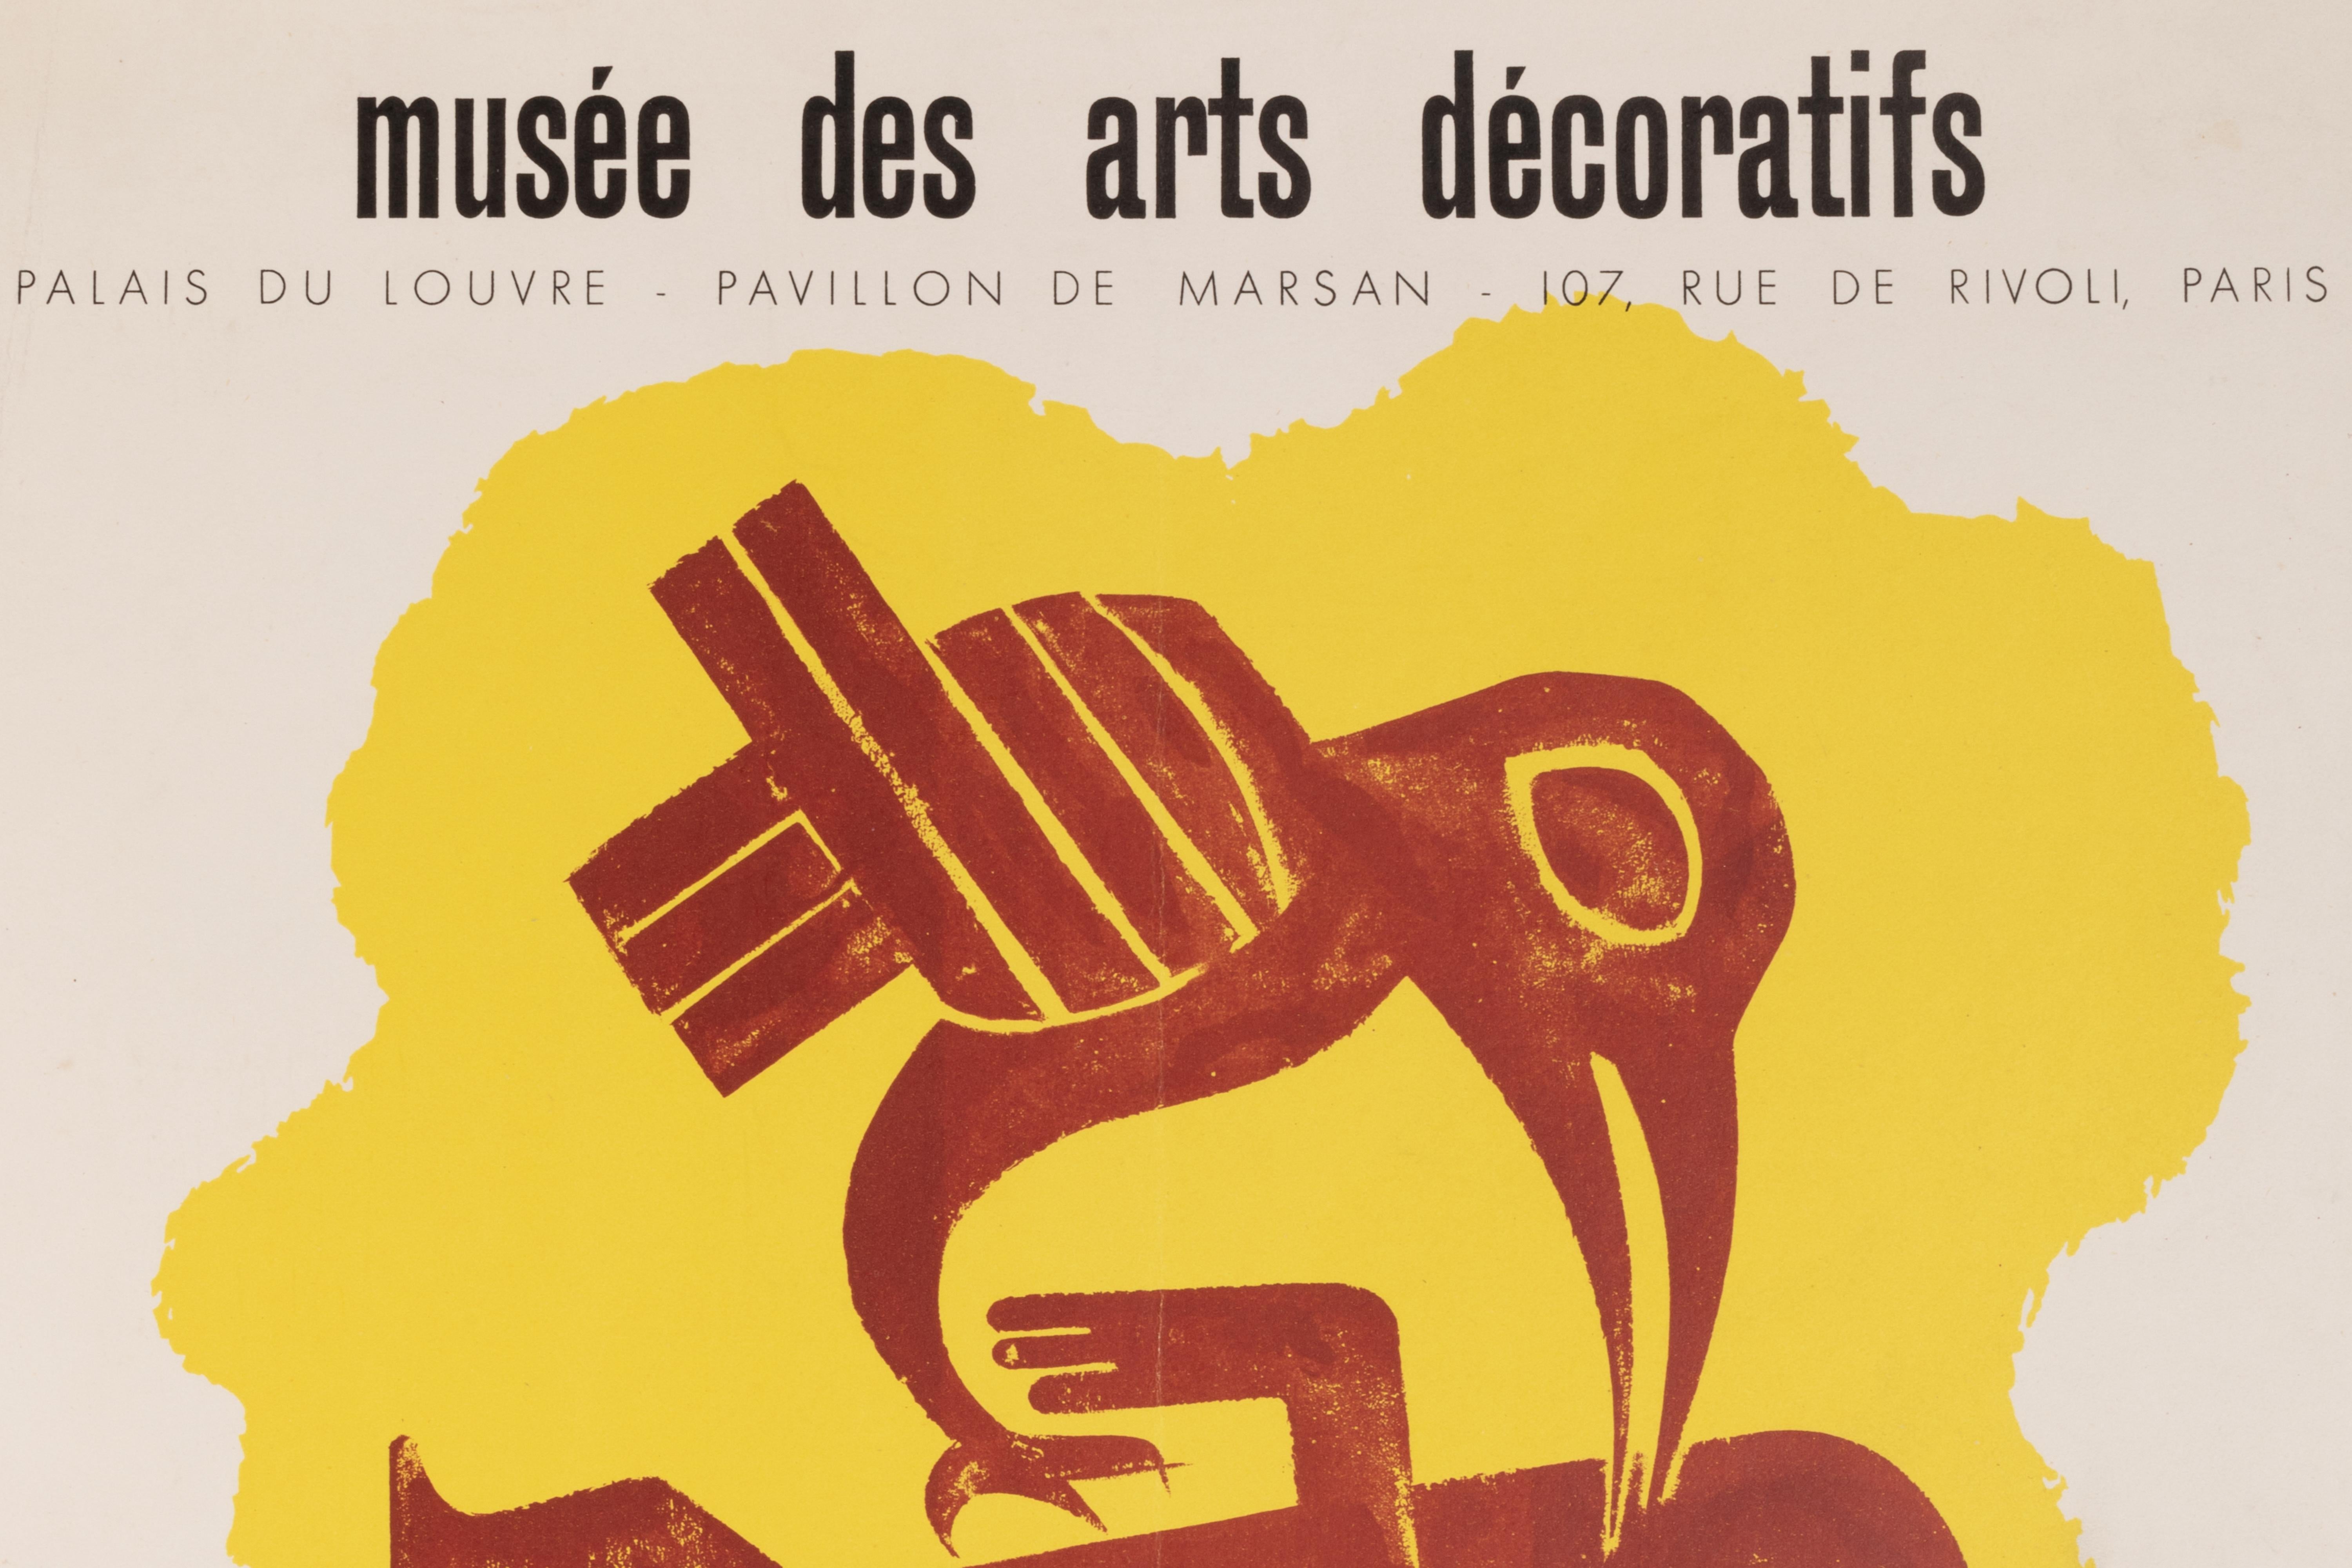 Posters from the Museum of Decorative Arts created by Jean Carlu in 1956 for an exhibition on Ancient Peruvian Art from the Nathan Cummings Collection.

Artist: Jean Carlu (1900-1997)
Title: Musée des Arts Décoratifs – Art Ancien du Pérou
Date: